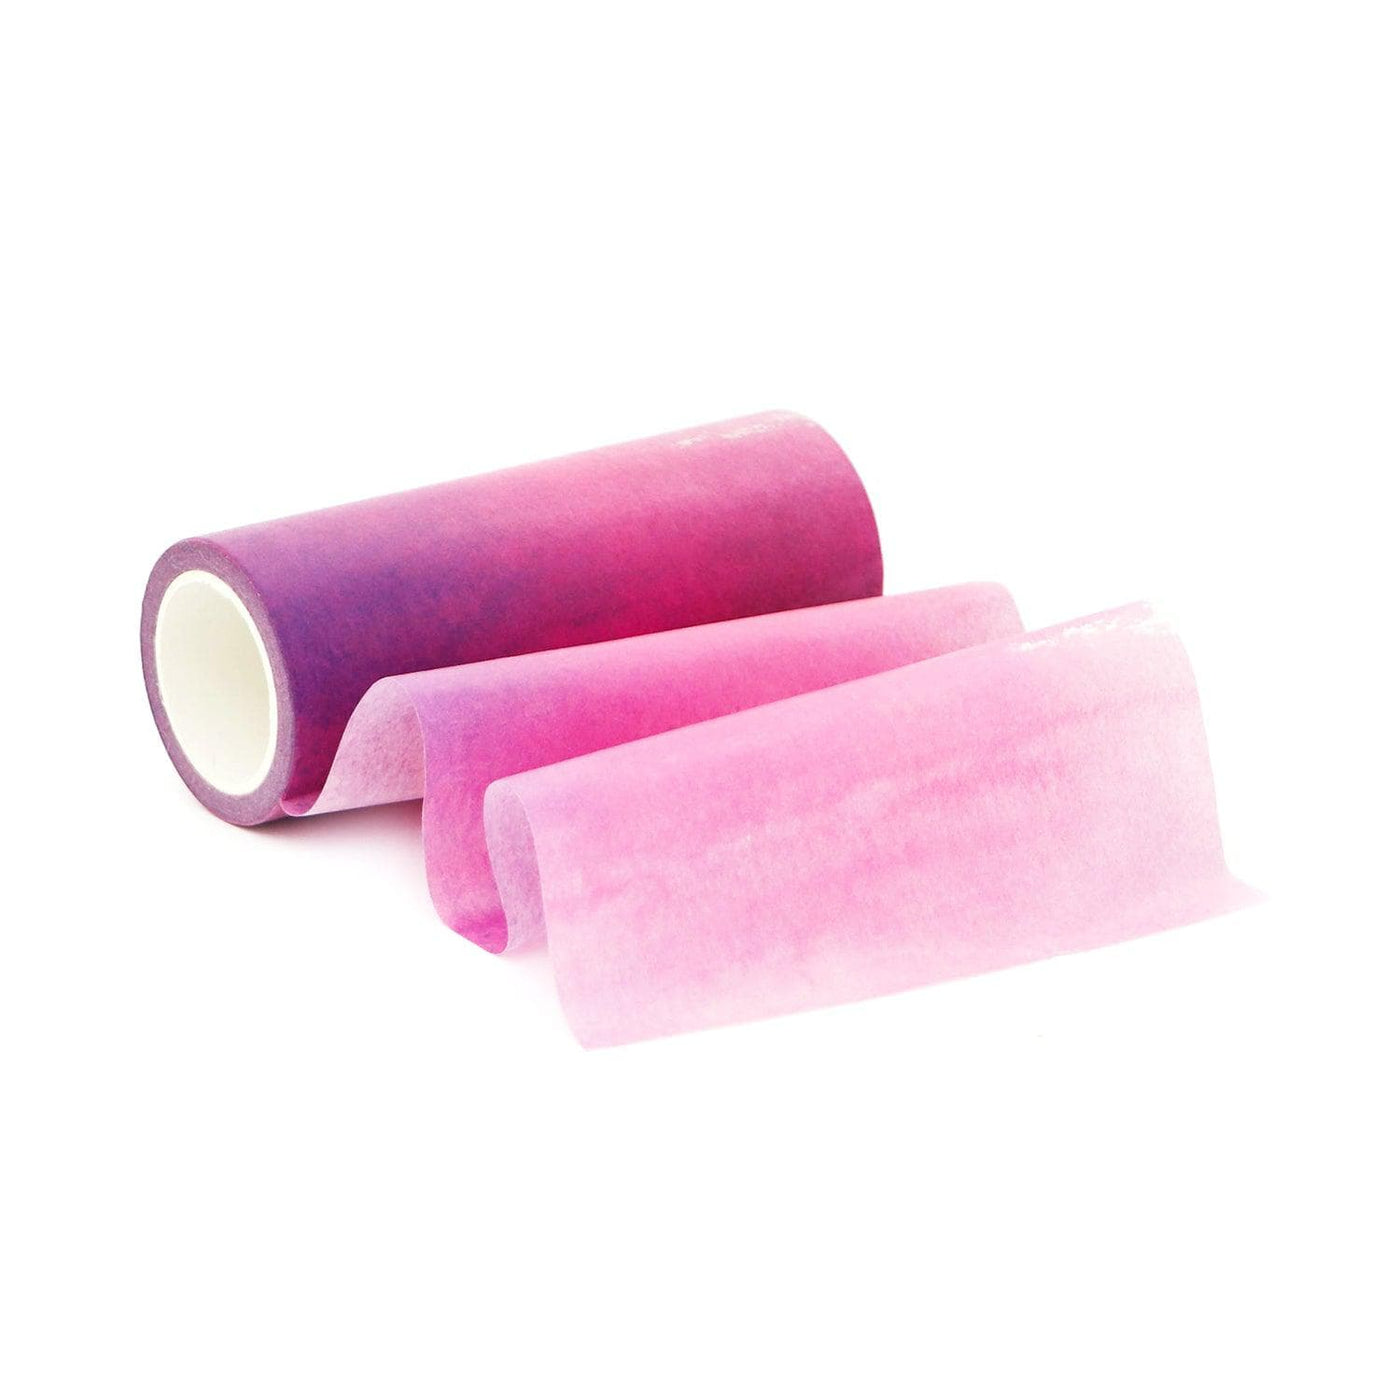 XF Tape Washi Tapes Pink Watercolor Wide Washi Tape